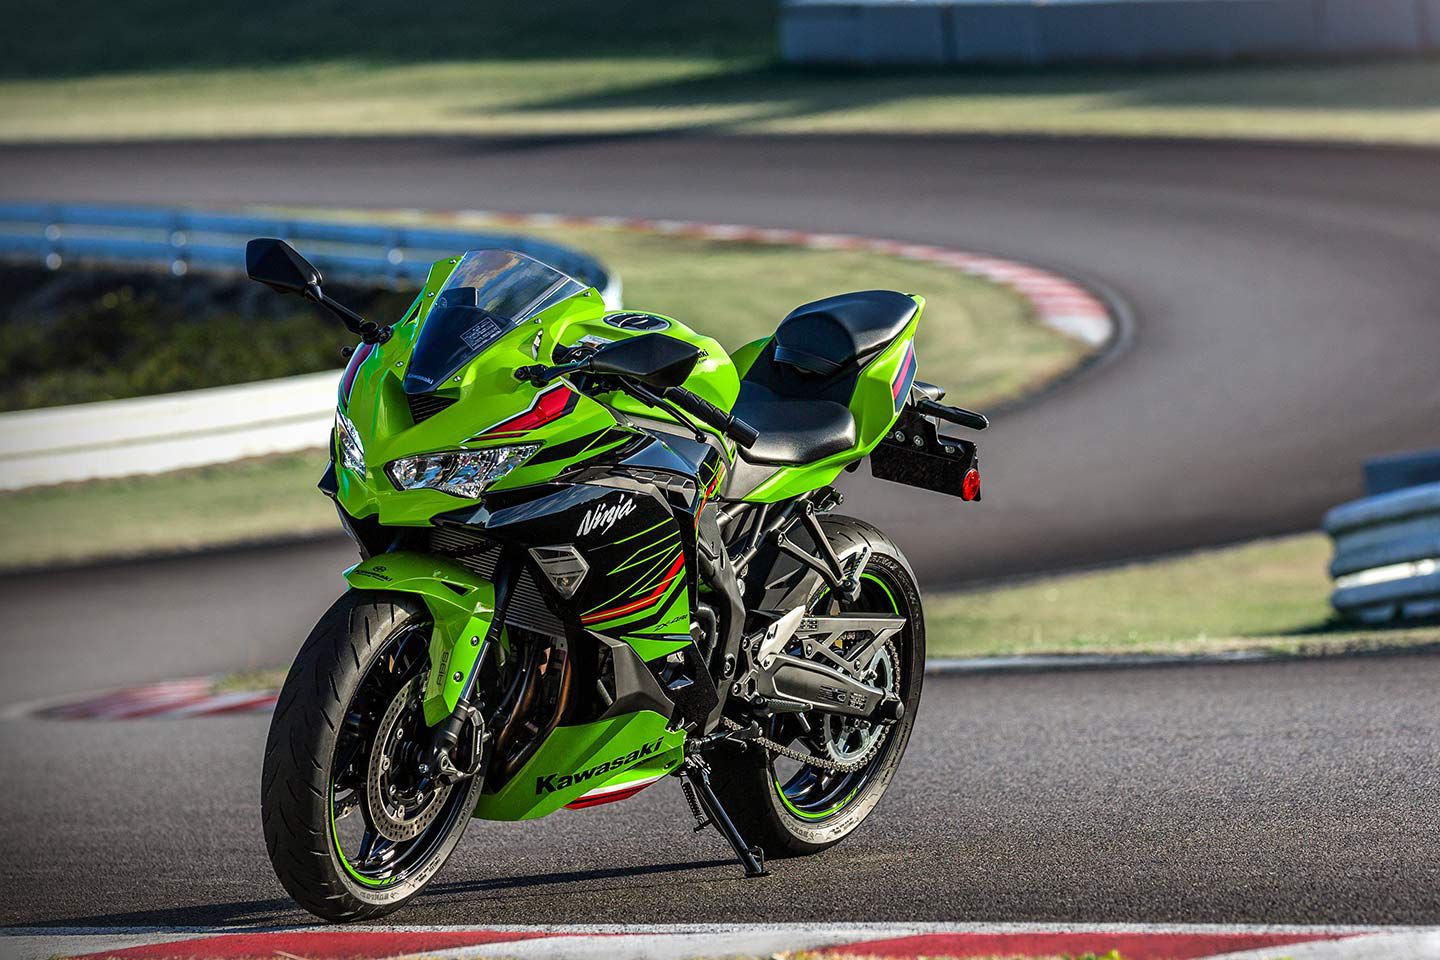 From the nose, it’s clear that the ZX-4RR is no Ninja 400—just look at that oversized ram air duct, which feeds the airbox via intake funnels in two different lengths of 40 and 60mm. The engine’s oversquare bore allows for more valve area with 22.1mm intake and 19mm exhaust valves. Available only in KRT Edition livery, the ZX-4RR looks the Kawasaki sportbike part.